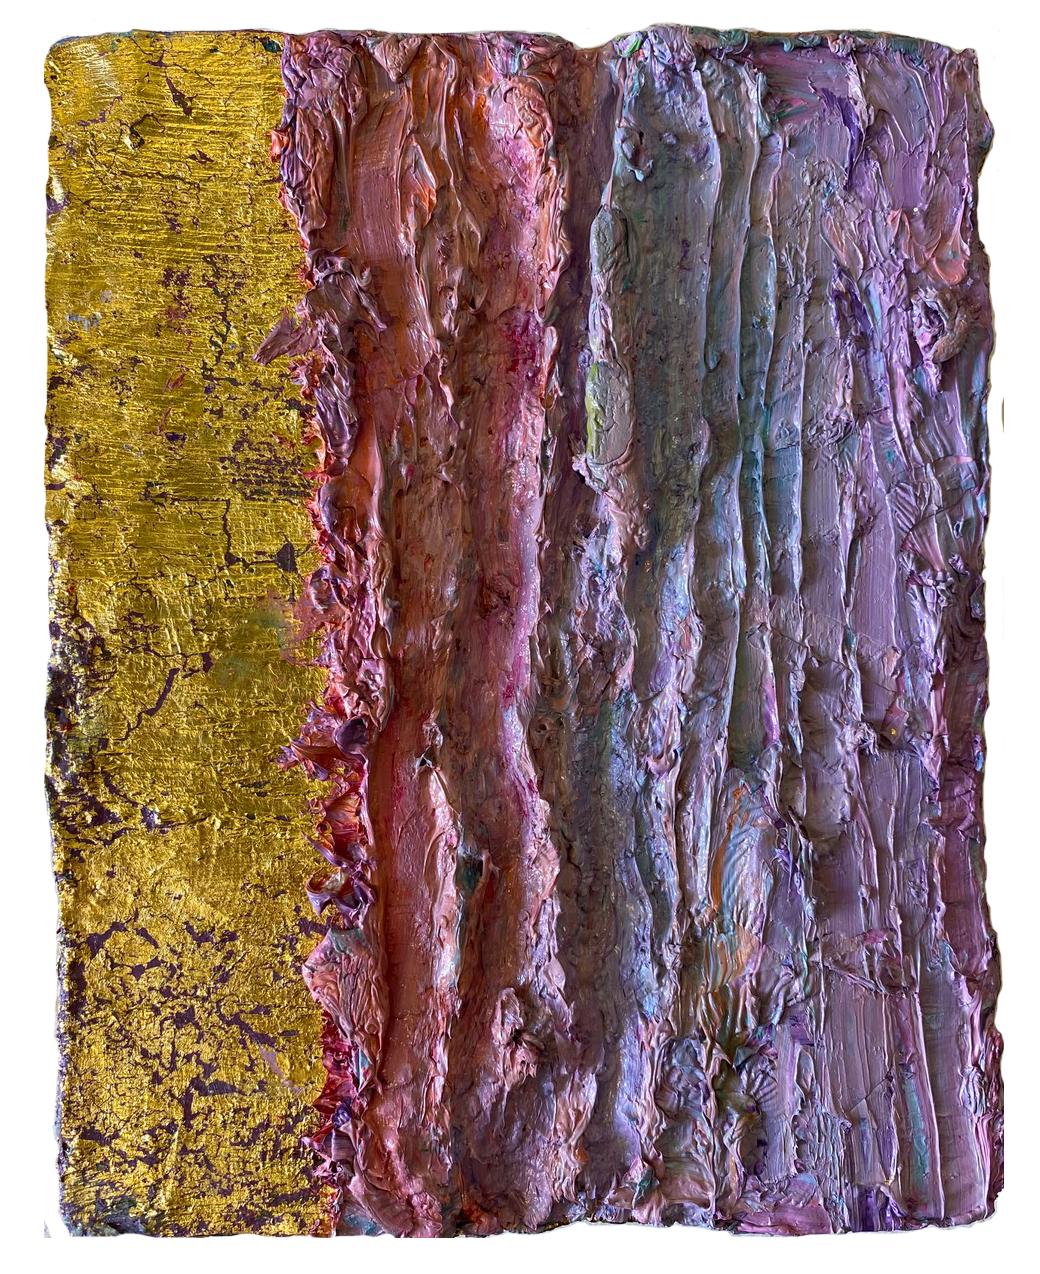 Color Boundaries #35. Abstract painting on canvas, mounted on a stretcher.